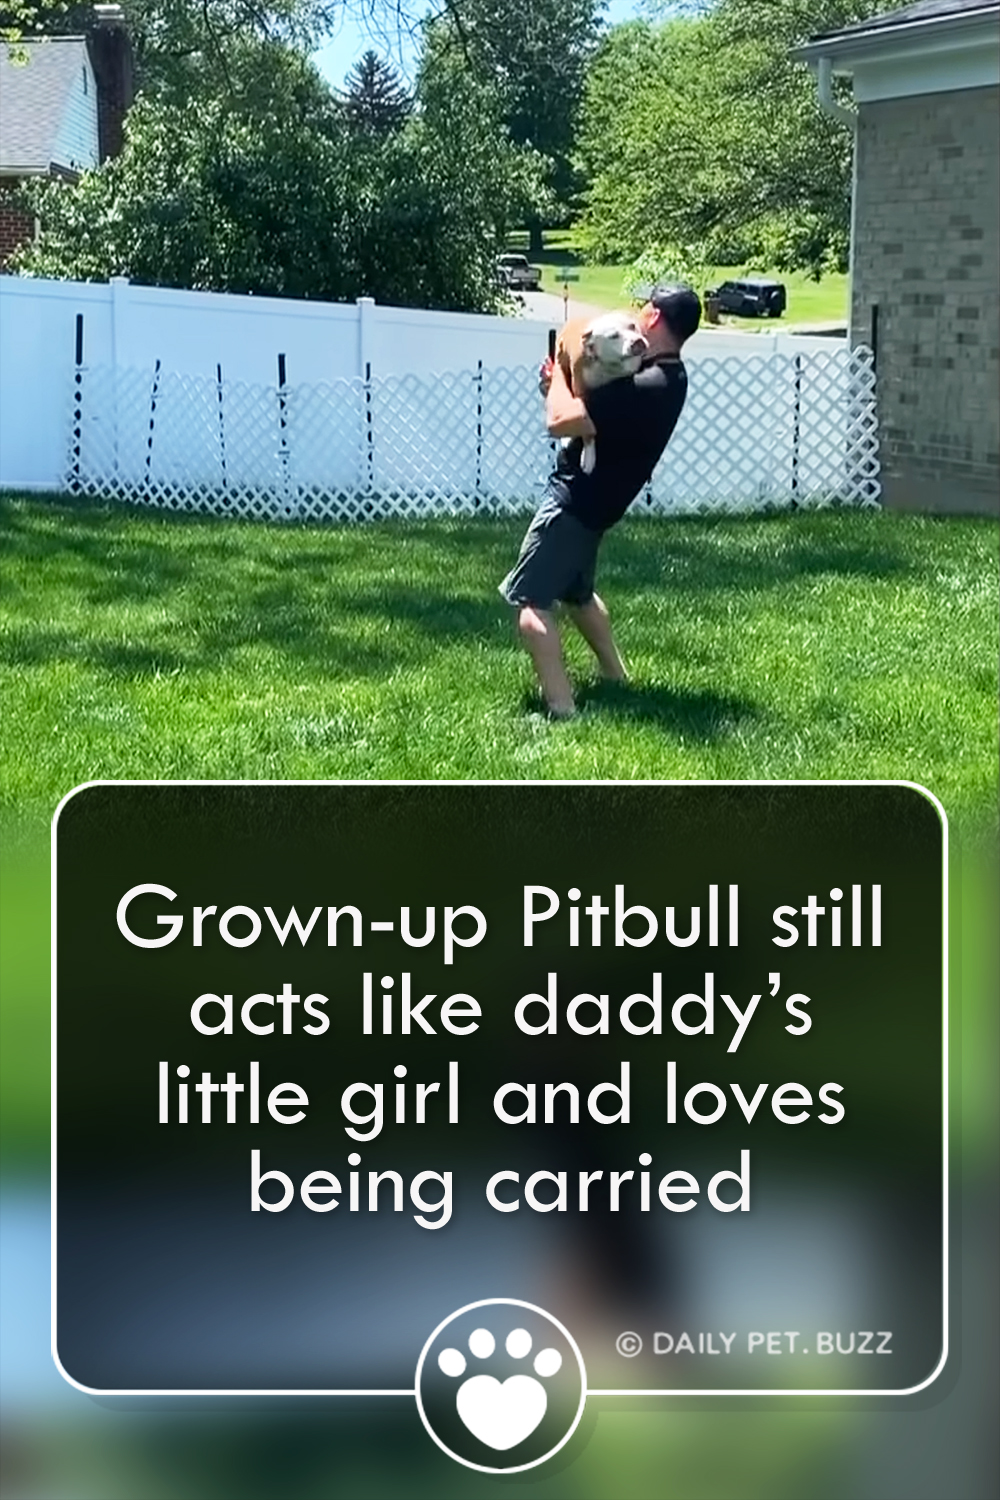 Grown-up Pitbull still acts like daddy’s little girl and loves being carried